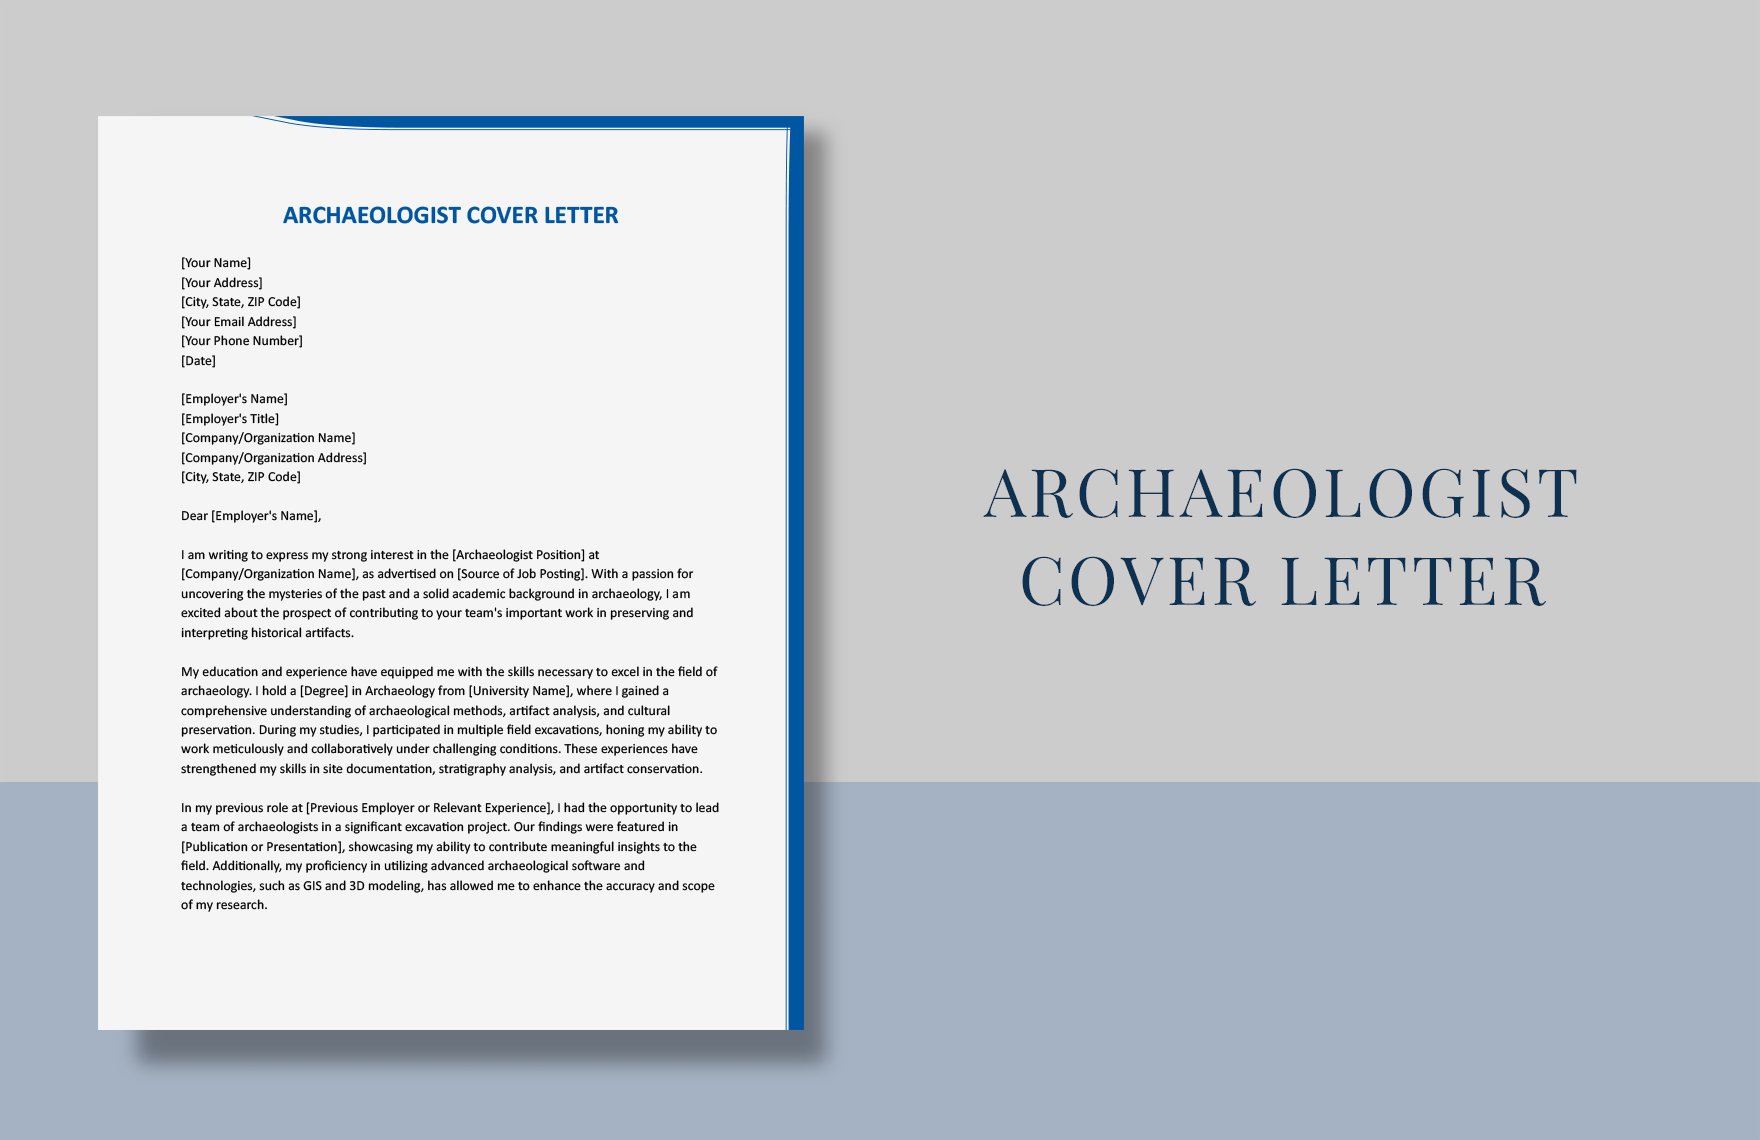 Archaeologist Cover Letter